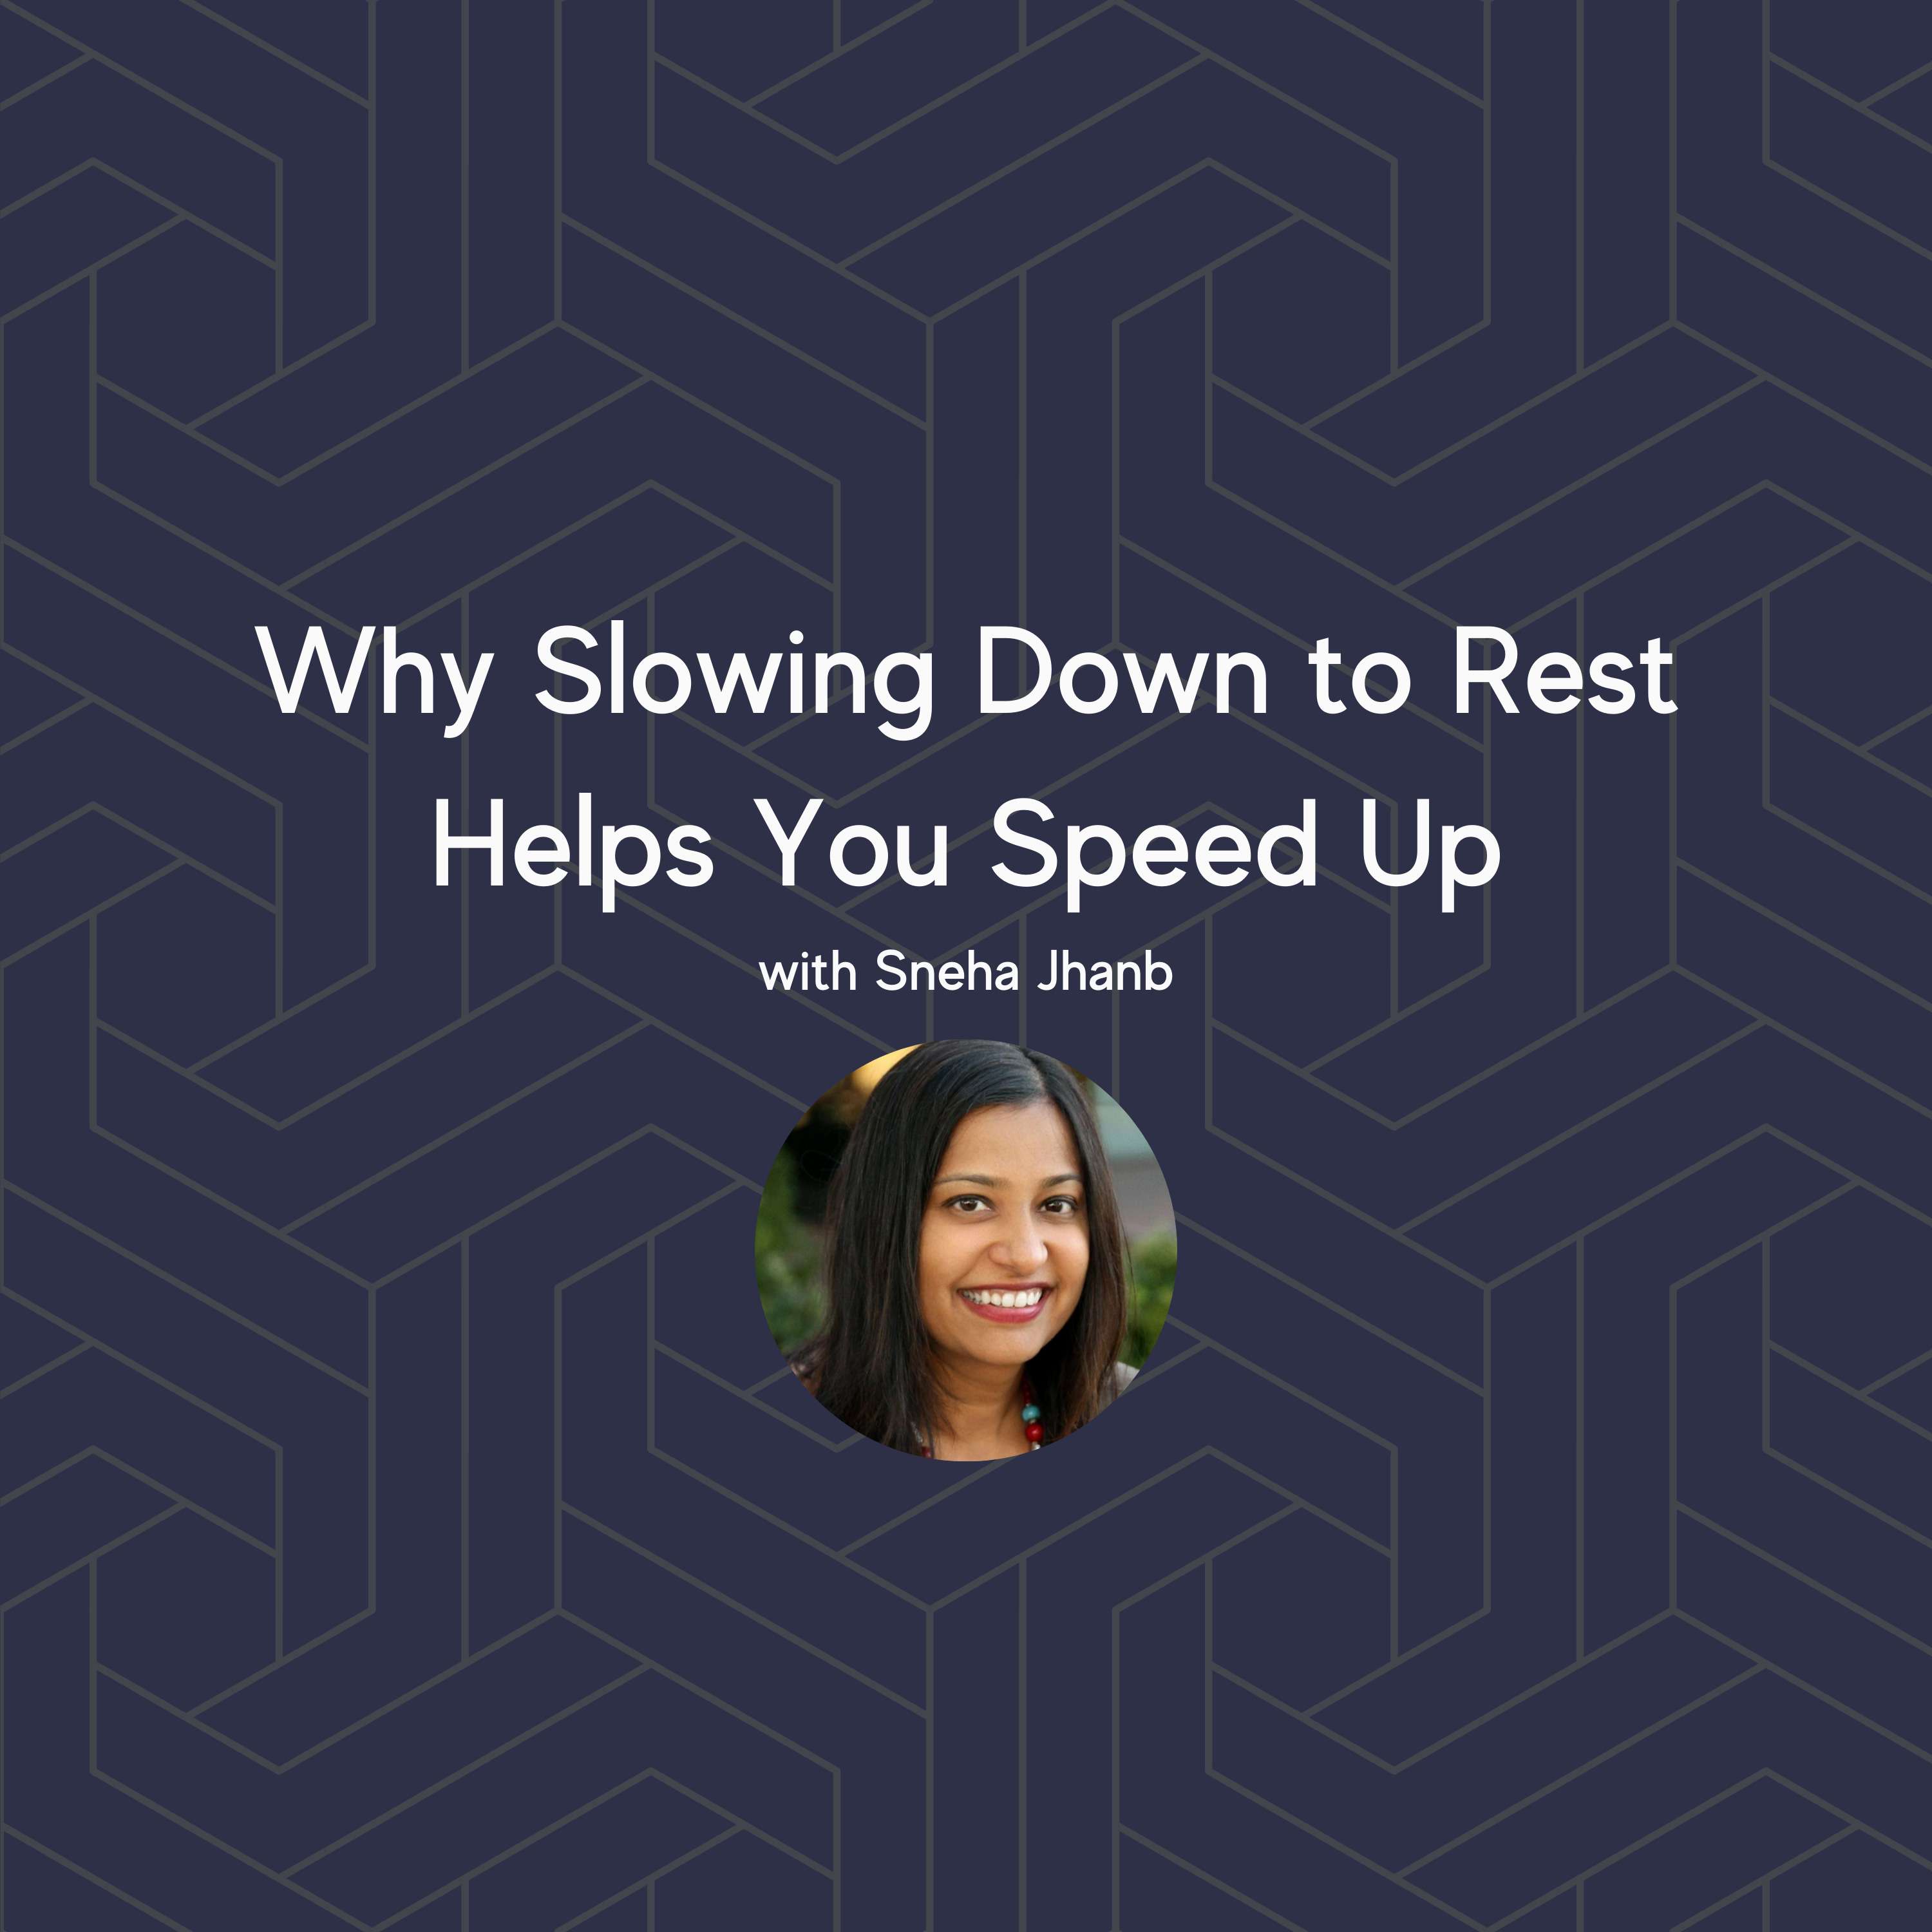 Why Slowing Down to Rest Helps You Speed Up with Sneha Jhanb